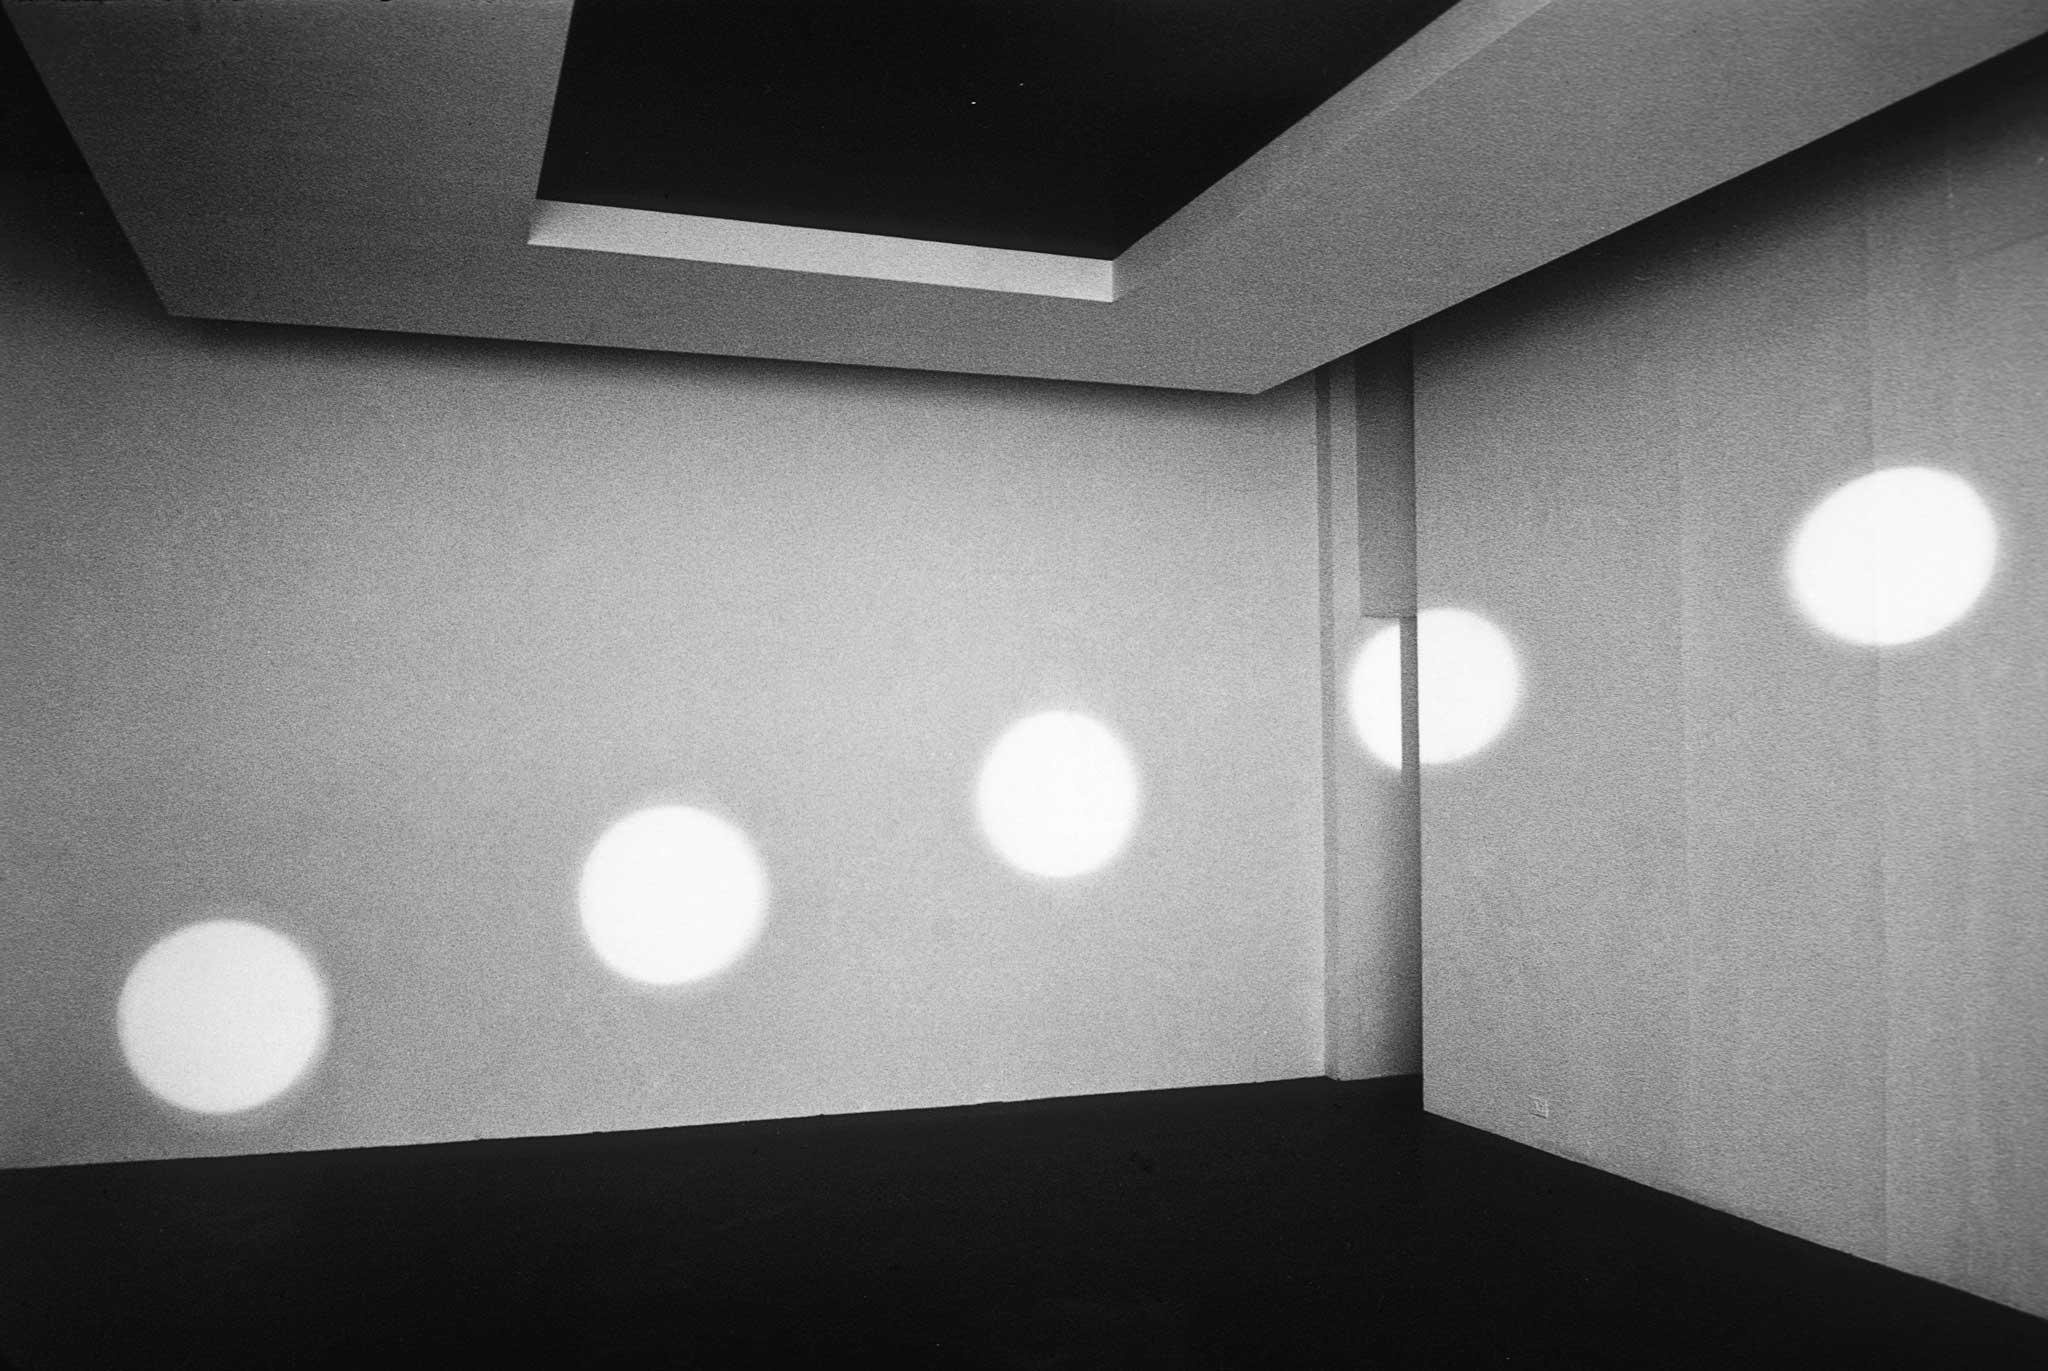 circular orbs of light reflected on two white walls of a room with no windows